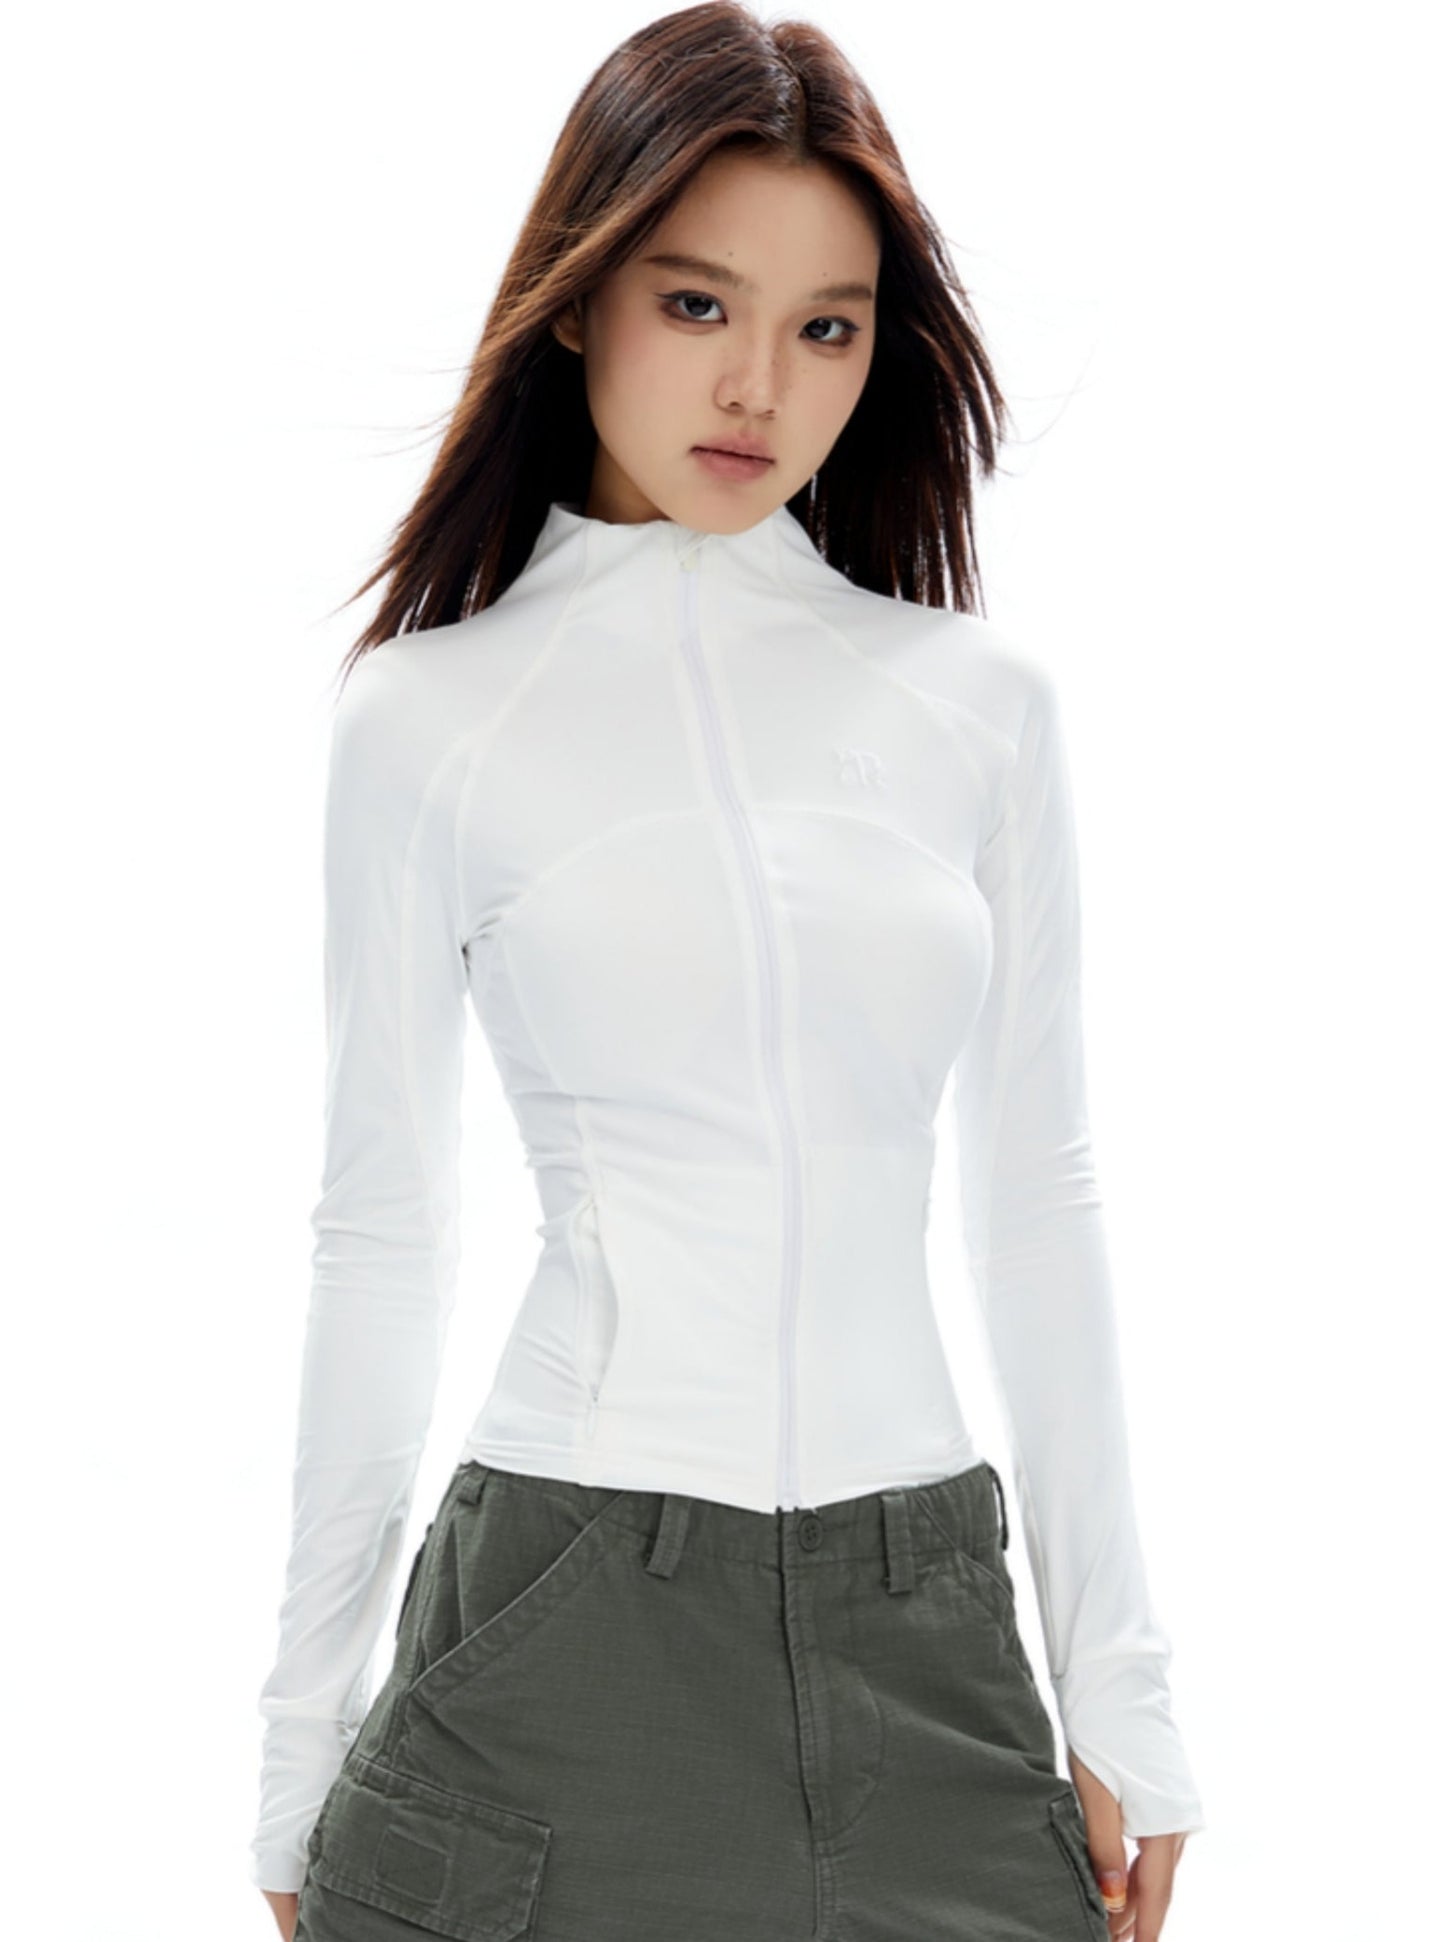 Protection Clothing Slim Yoga Wear Top